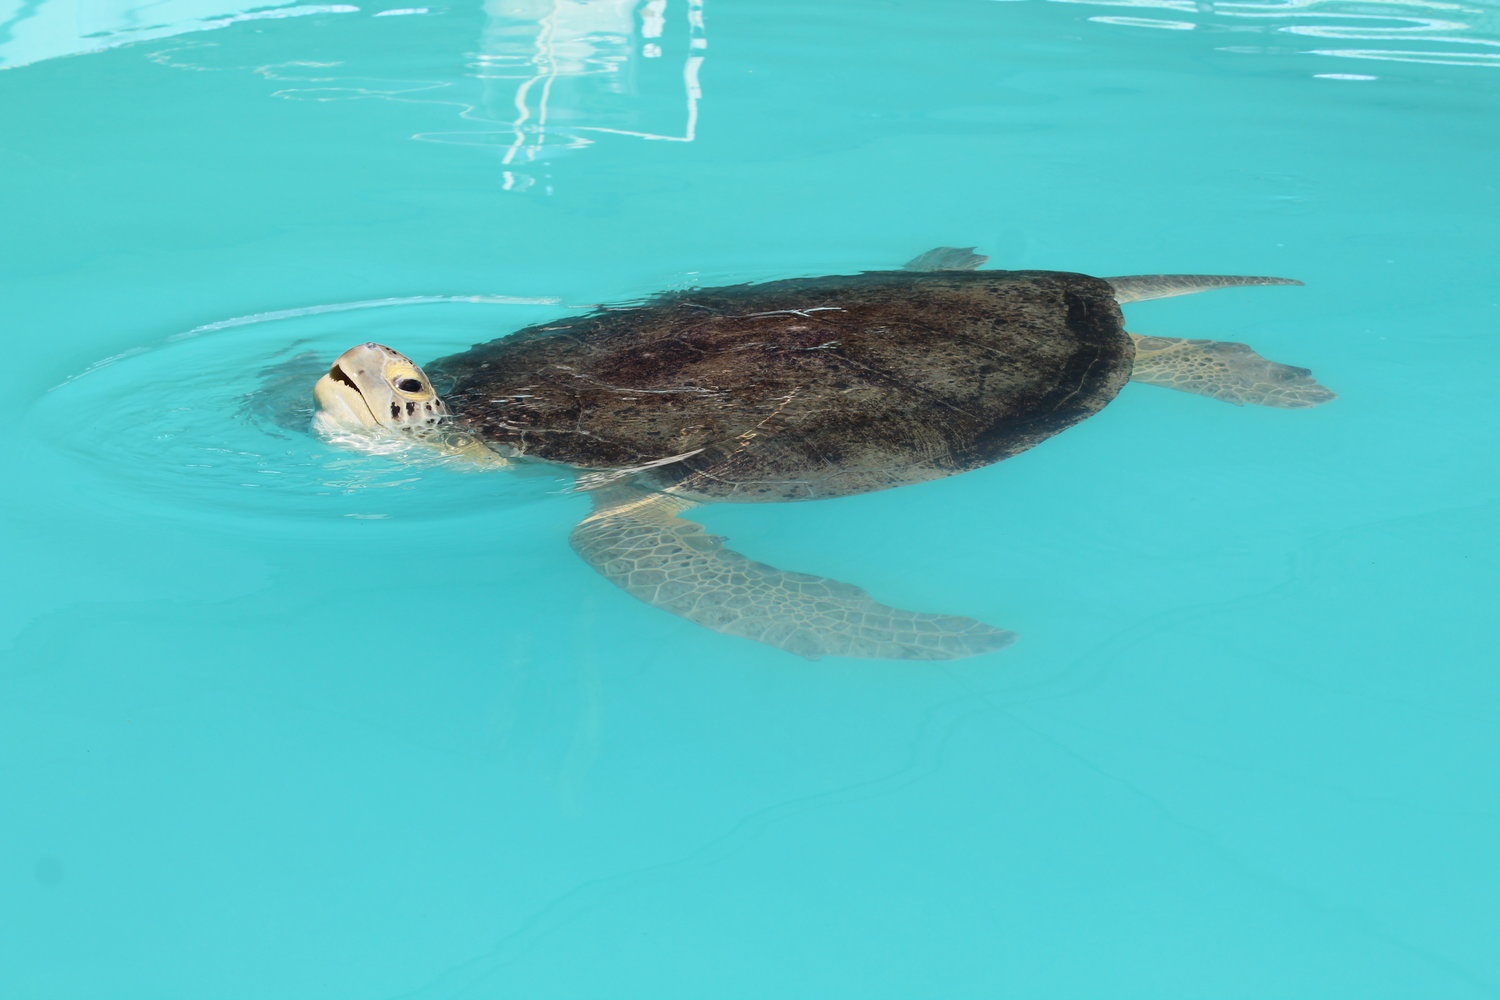 The Sea Turtle Rescue Hospital performs research on the giant turtles, including DNA to blood sampling. The hospital has its own operating room, and then rehabs the sea turtles until they are able to live on their own and re-enter their native habitat. Bubba, the giant sea turtle seen here in his own holding tank, has been treated for Ocular Fibropapilloma and is getting ready to be released into the Gulf of Mexico.